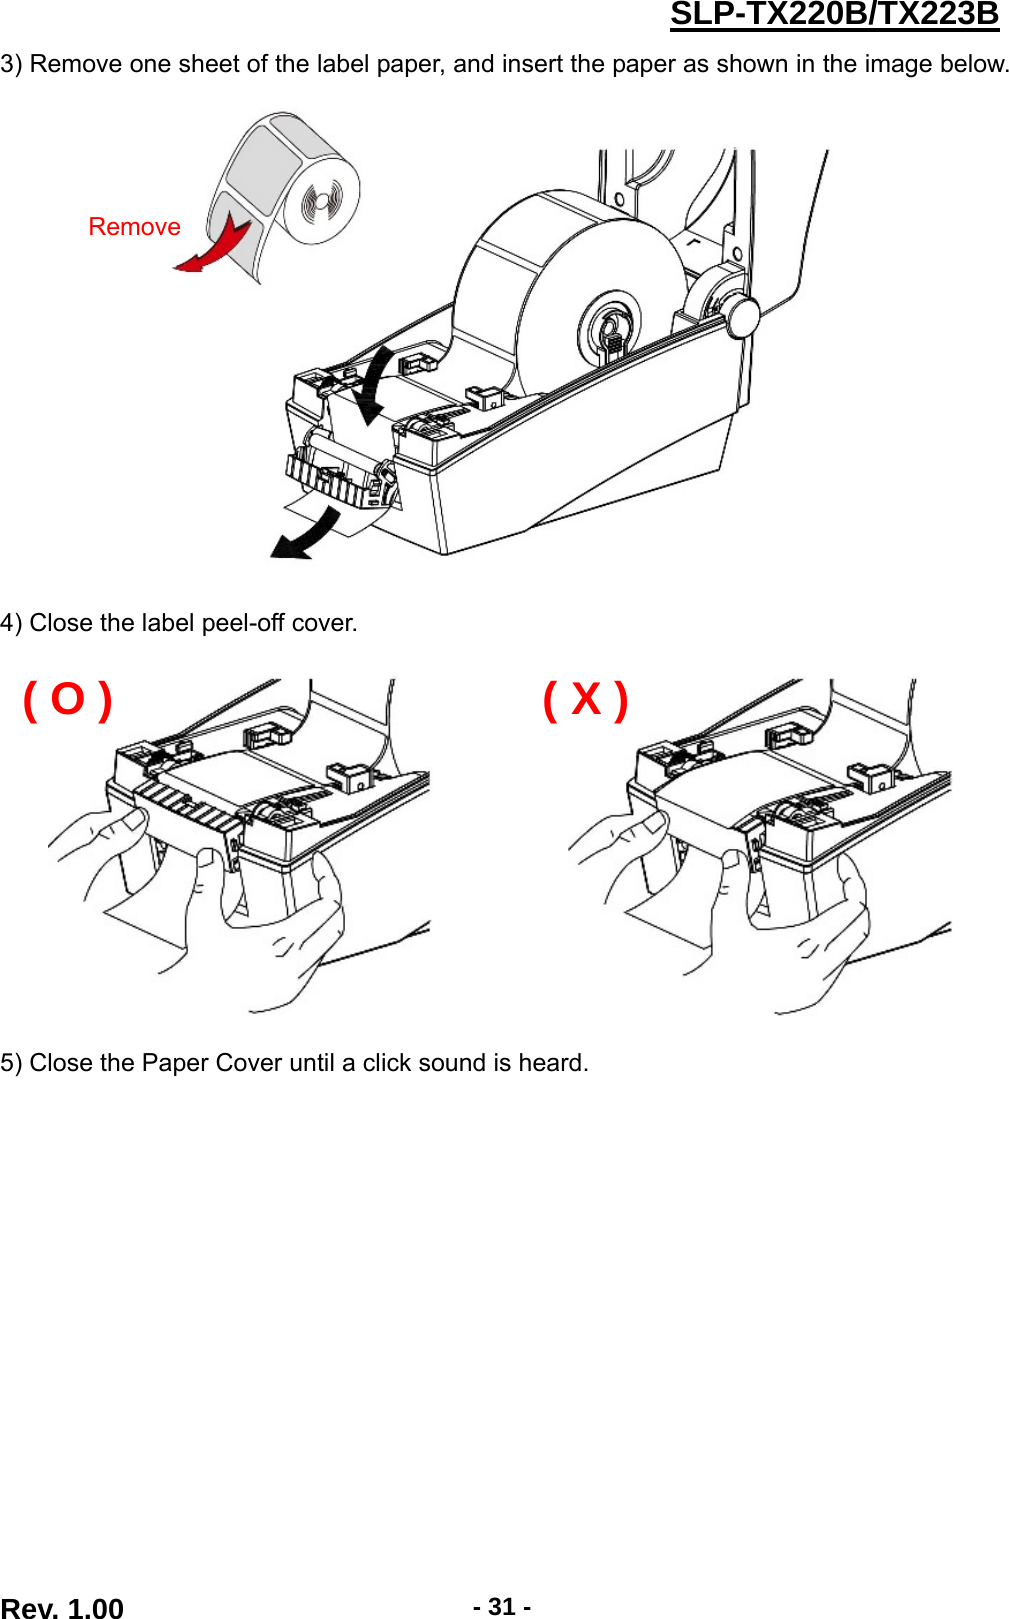  Rev. 1.00  - 31 -SLP-TX220B/TX223B3) Remove one sheet of the label paper, and insert the paper as shown in the image below.      4) Close the label peel-off cover.    5) Close the Paper Cover until a click sound is heard.   Remove( O ) ( X )